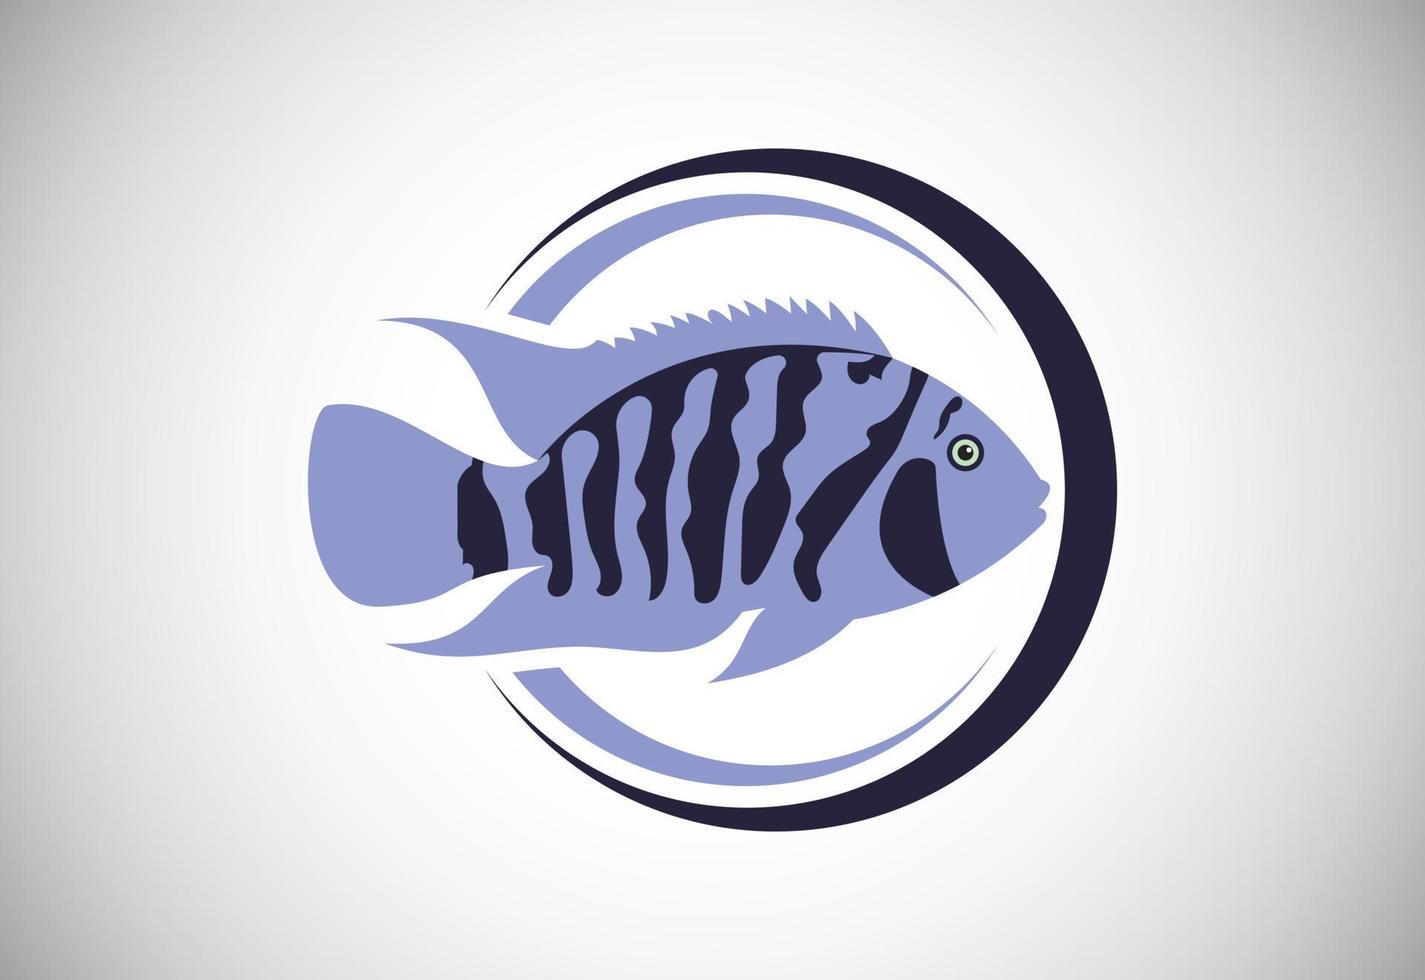 Cichlid Fish in a circle. Fish logo design template. Seafood restaurant shop Logotype concept icon. vector